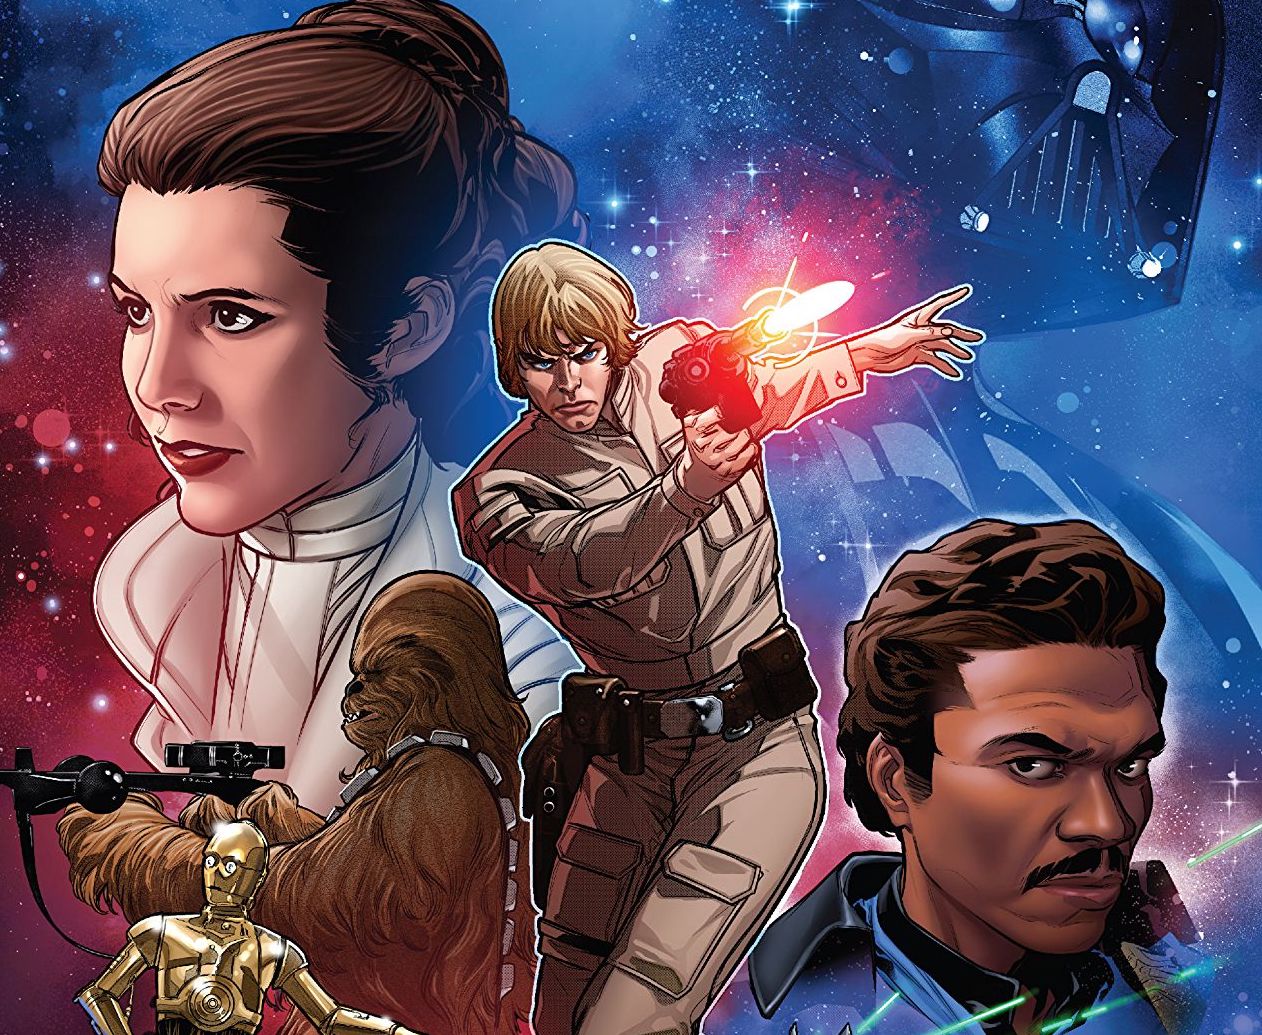 Star Wars #1 review